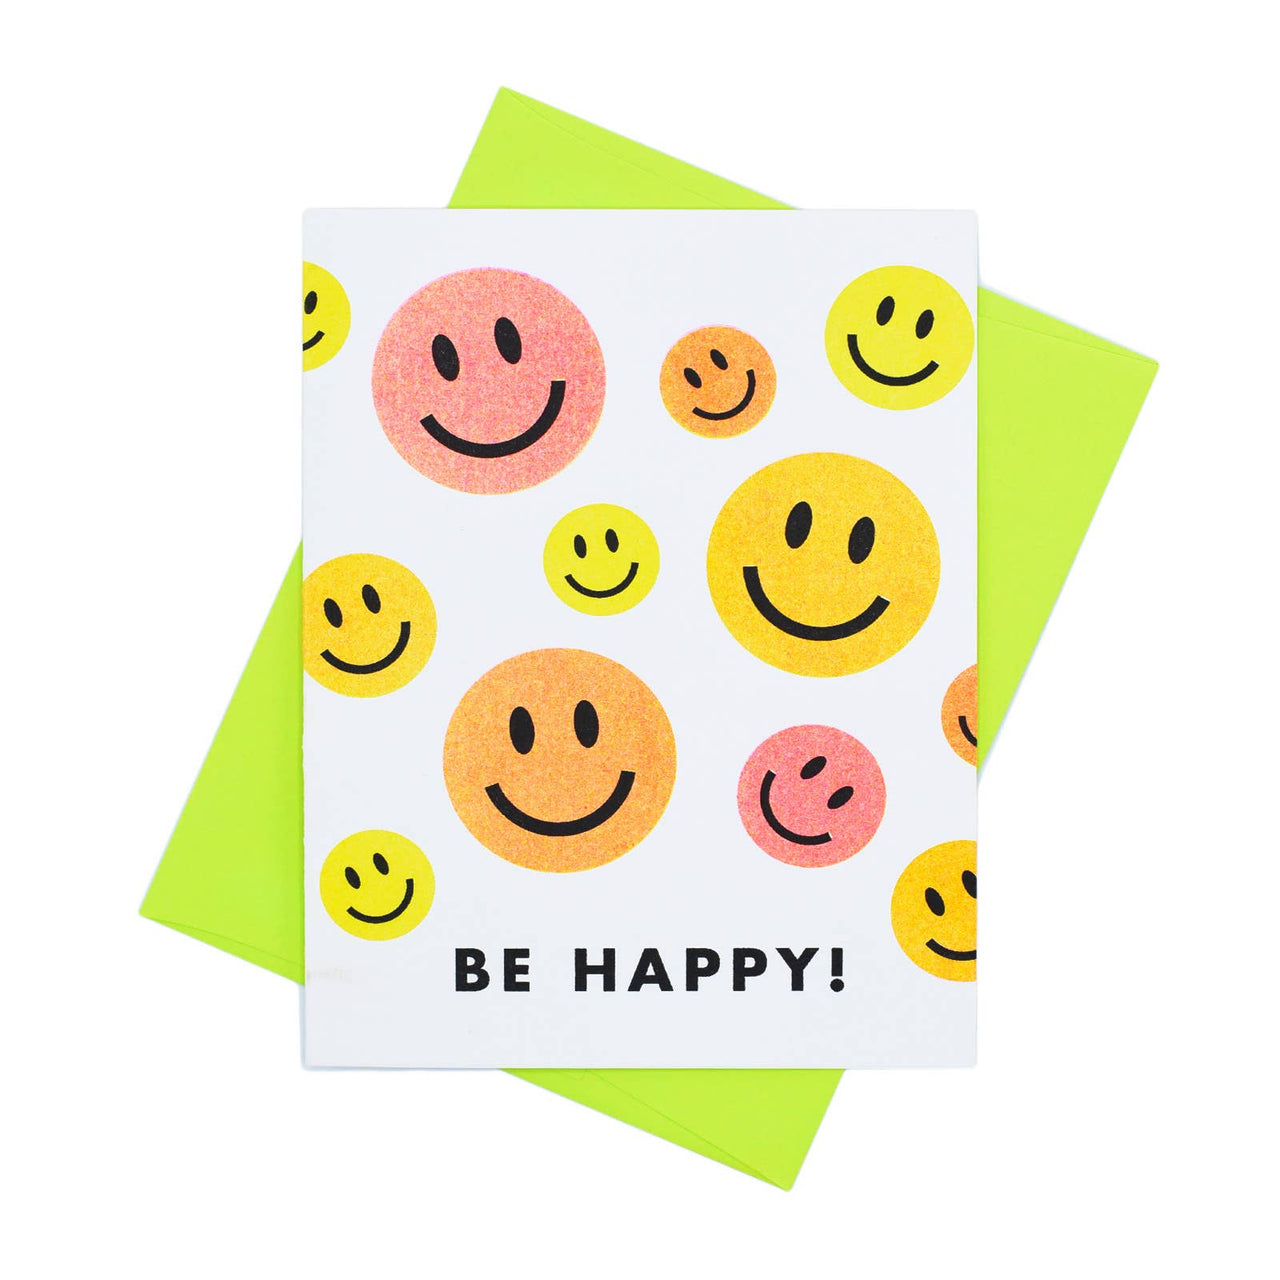 Be Happy! Smiley Face